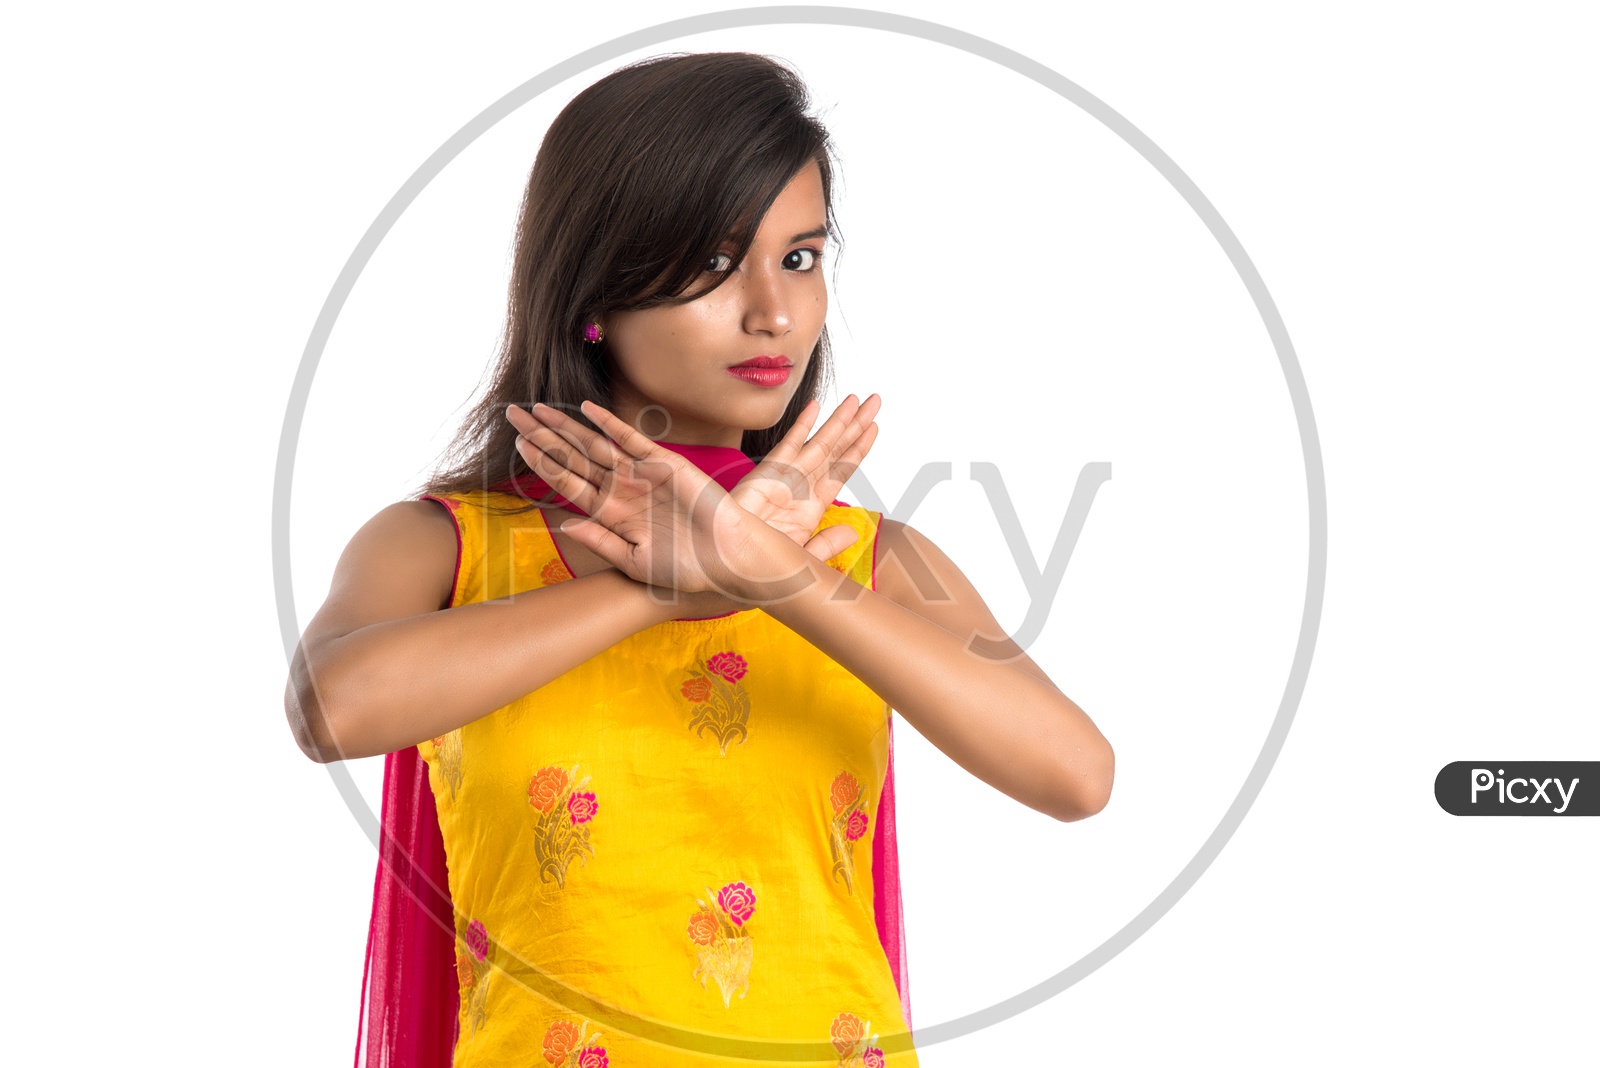 Young Indian Woman or Girl With Angry  Expressions And Gestures On an Isolated White Background